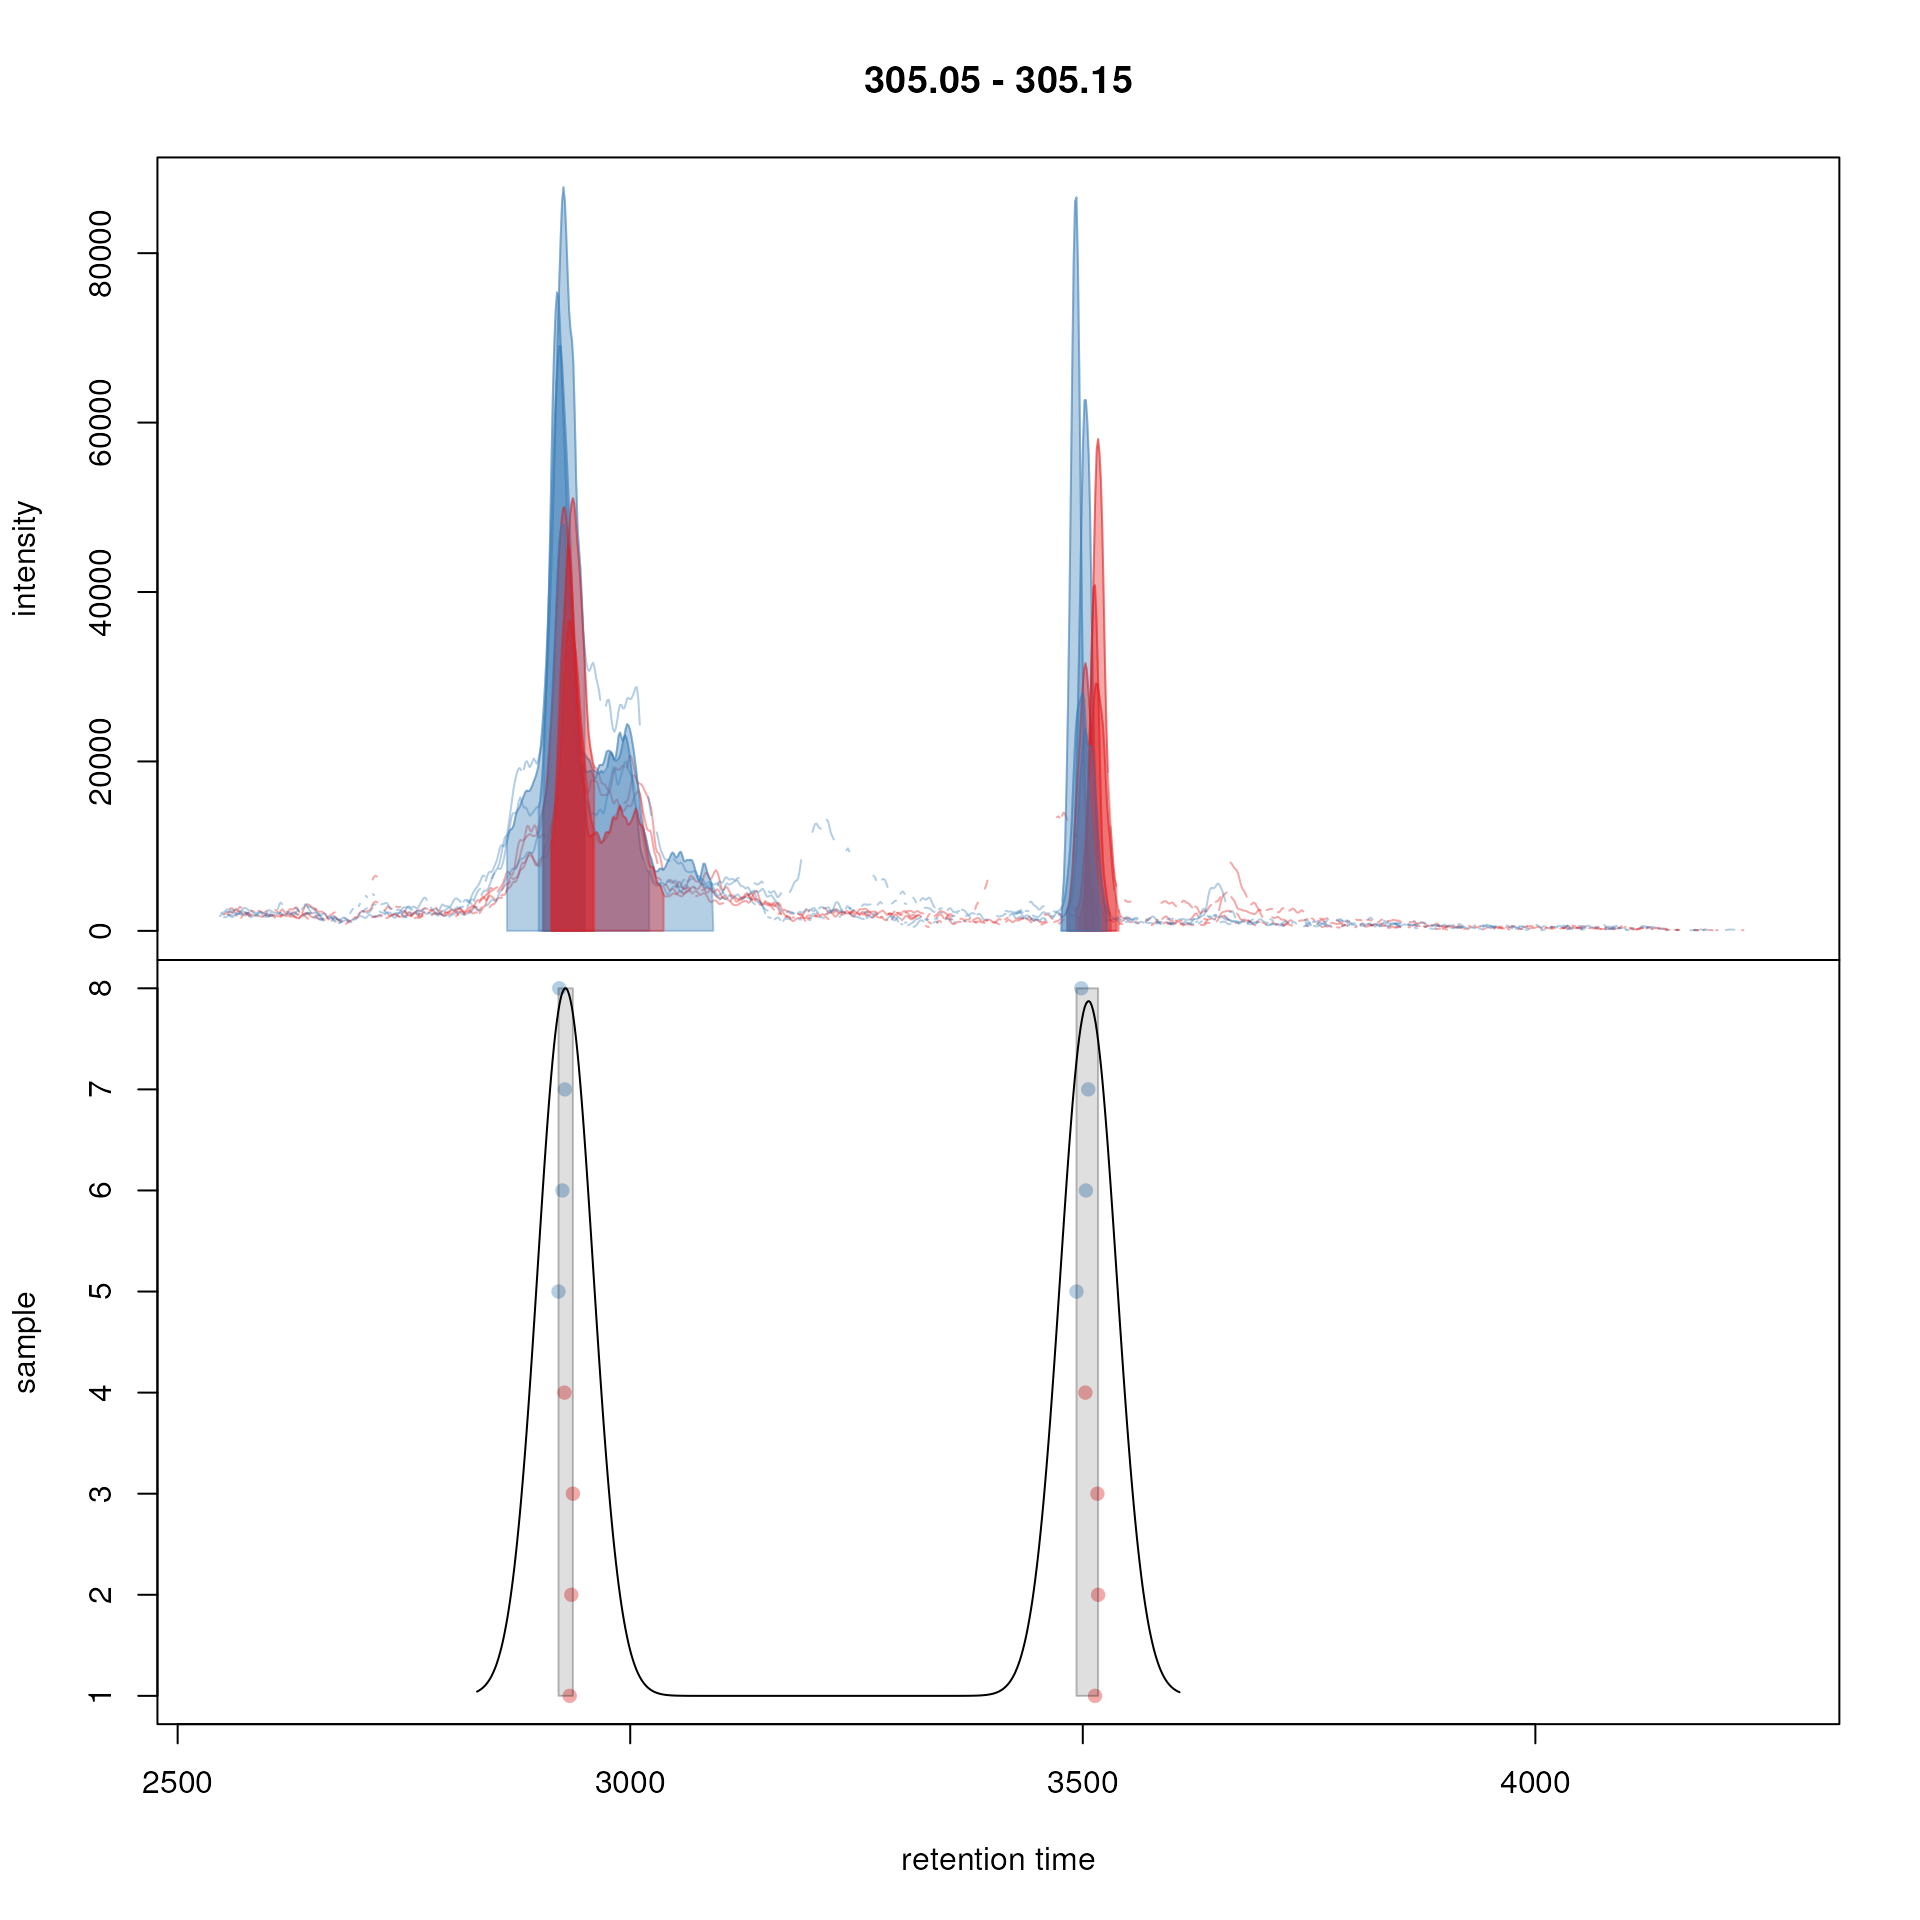 Example for peak density correspondence. Upper panel: chromatogram for an mz slice with multiple chromatographic peaks. lower panel: identified chromatographic peaks at their retention time (x-axis) and index within samples of the experiments (y-axis) for different values of the bw parameter. The black line represents the peak density estimate. Grouping of peaks (based on the provided settings) is indicated by grey rectangles.